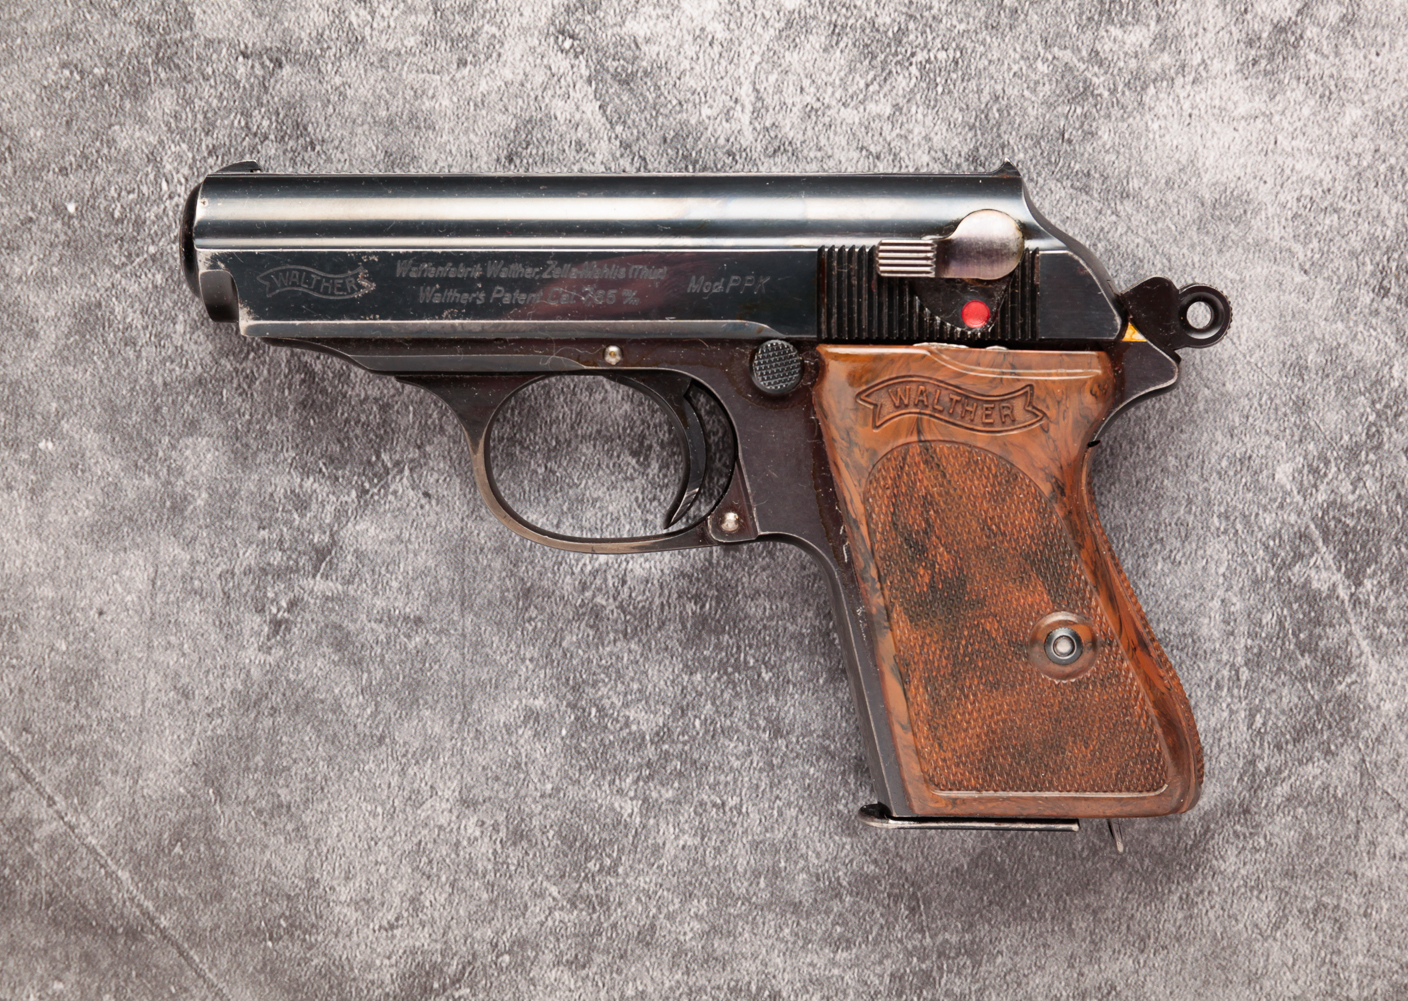 WALTHER PPK 7.65MM SEMI AUTOMATIC